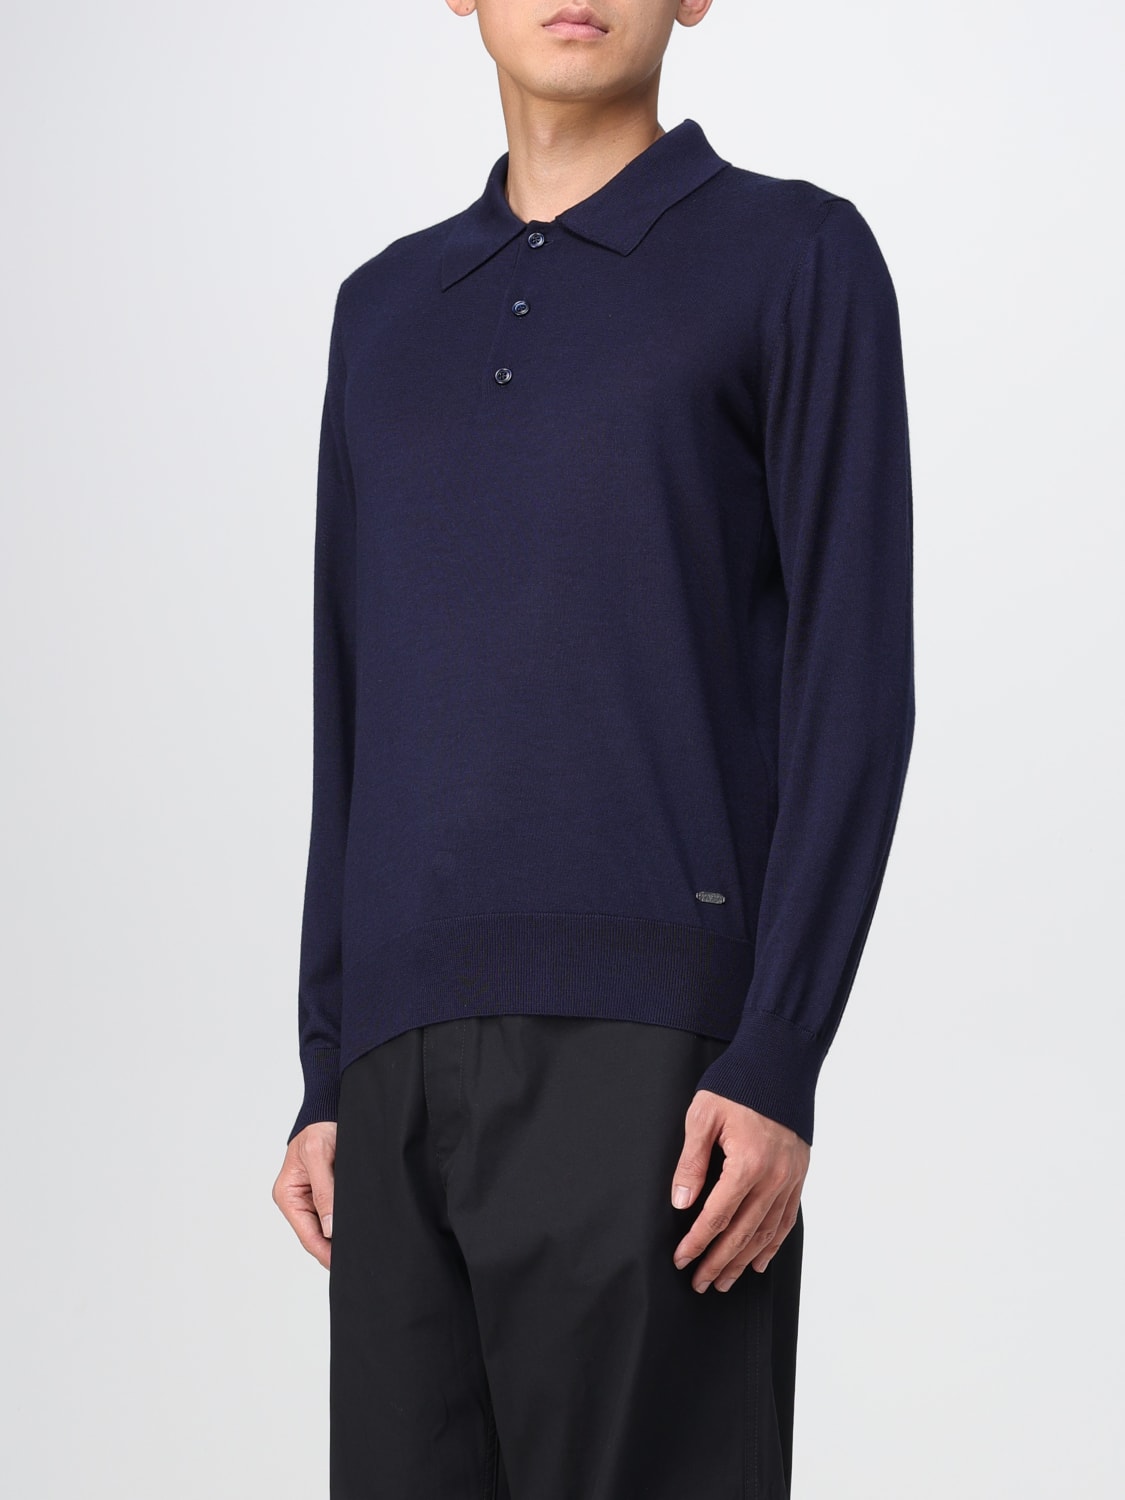 Brioni Knitwear 'Essential' Navy Blue Long-sleeved Polo Shirt